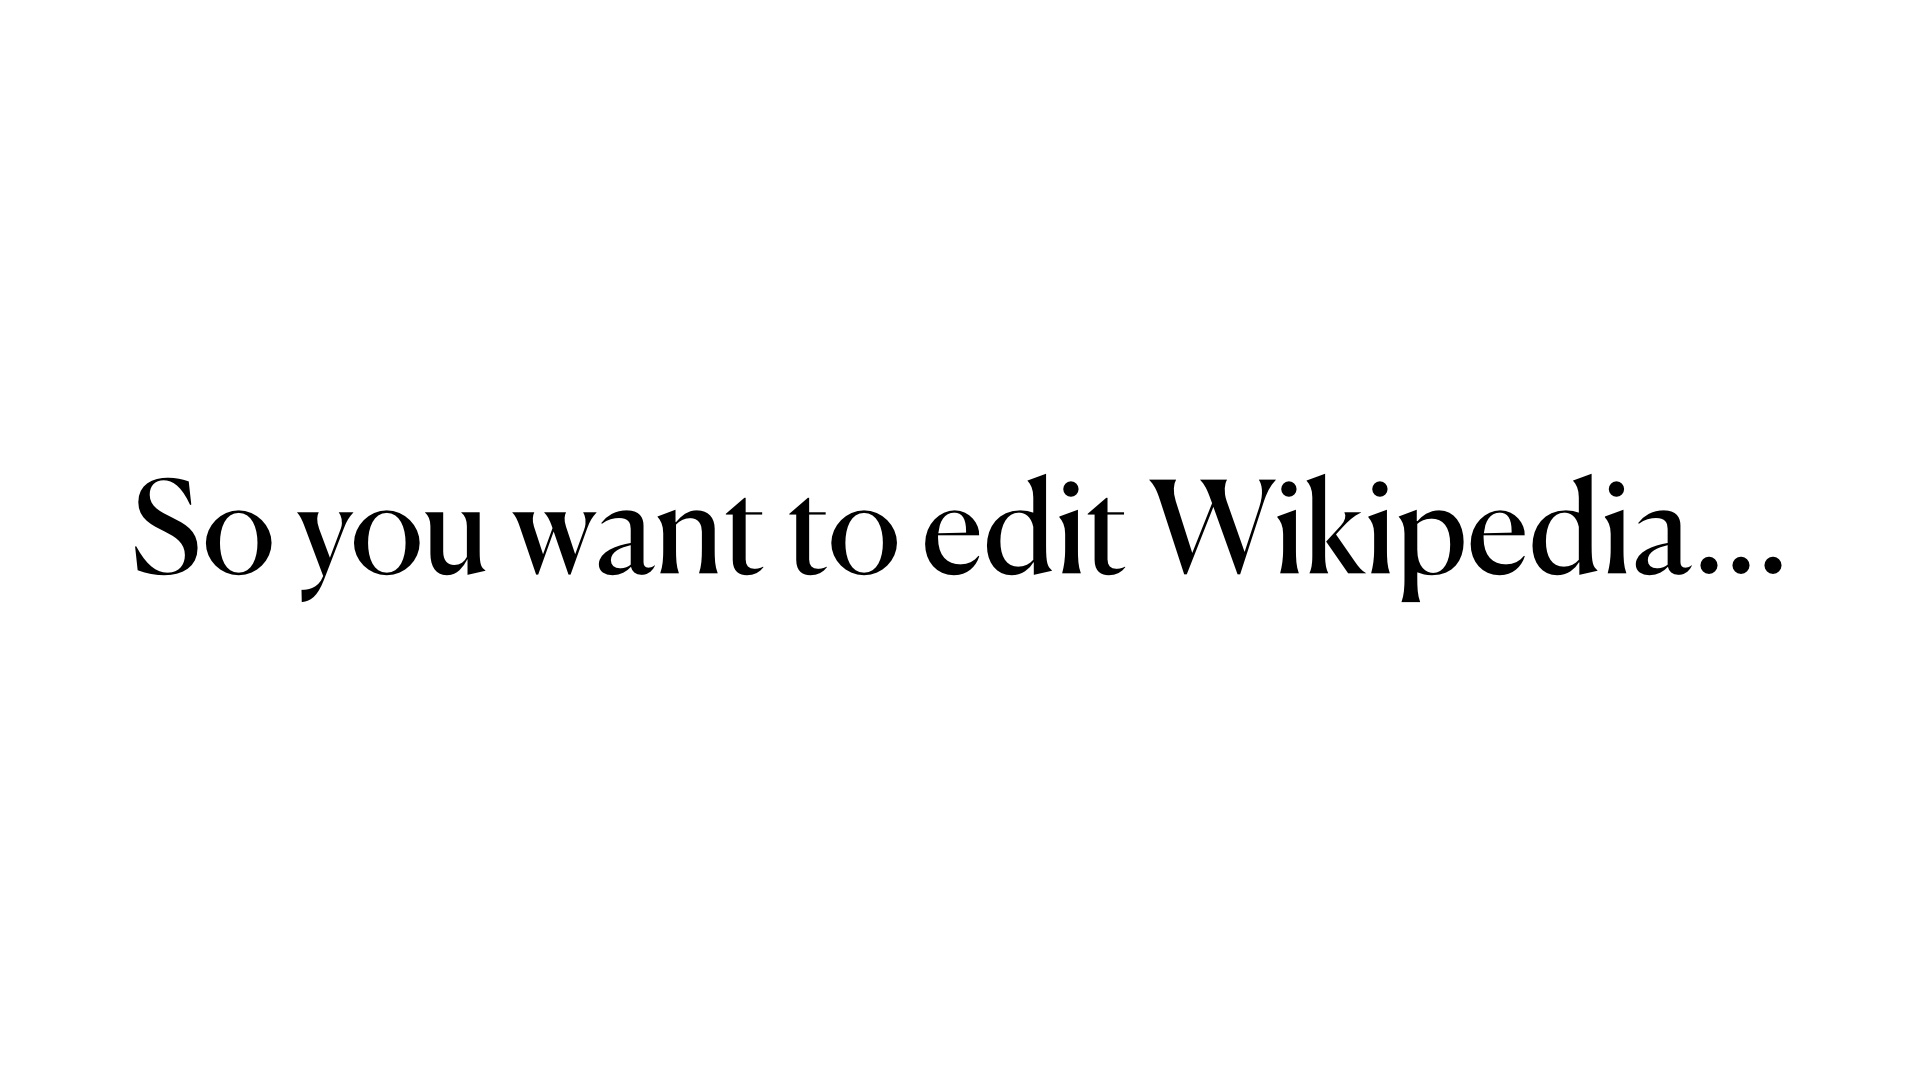 So you want to edit Wikipedia…